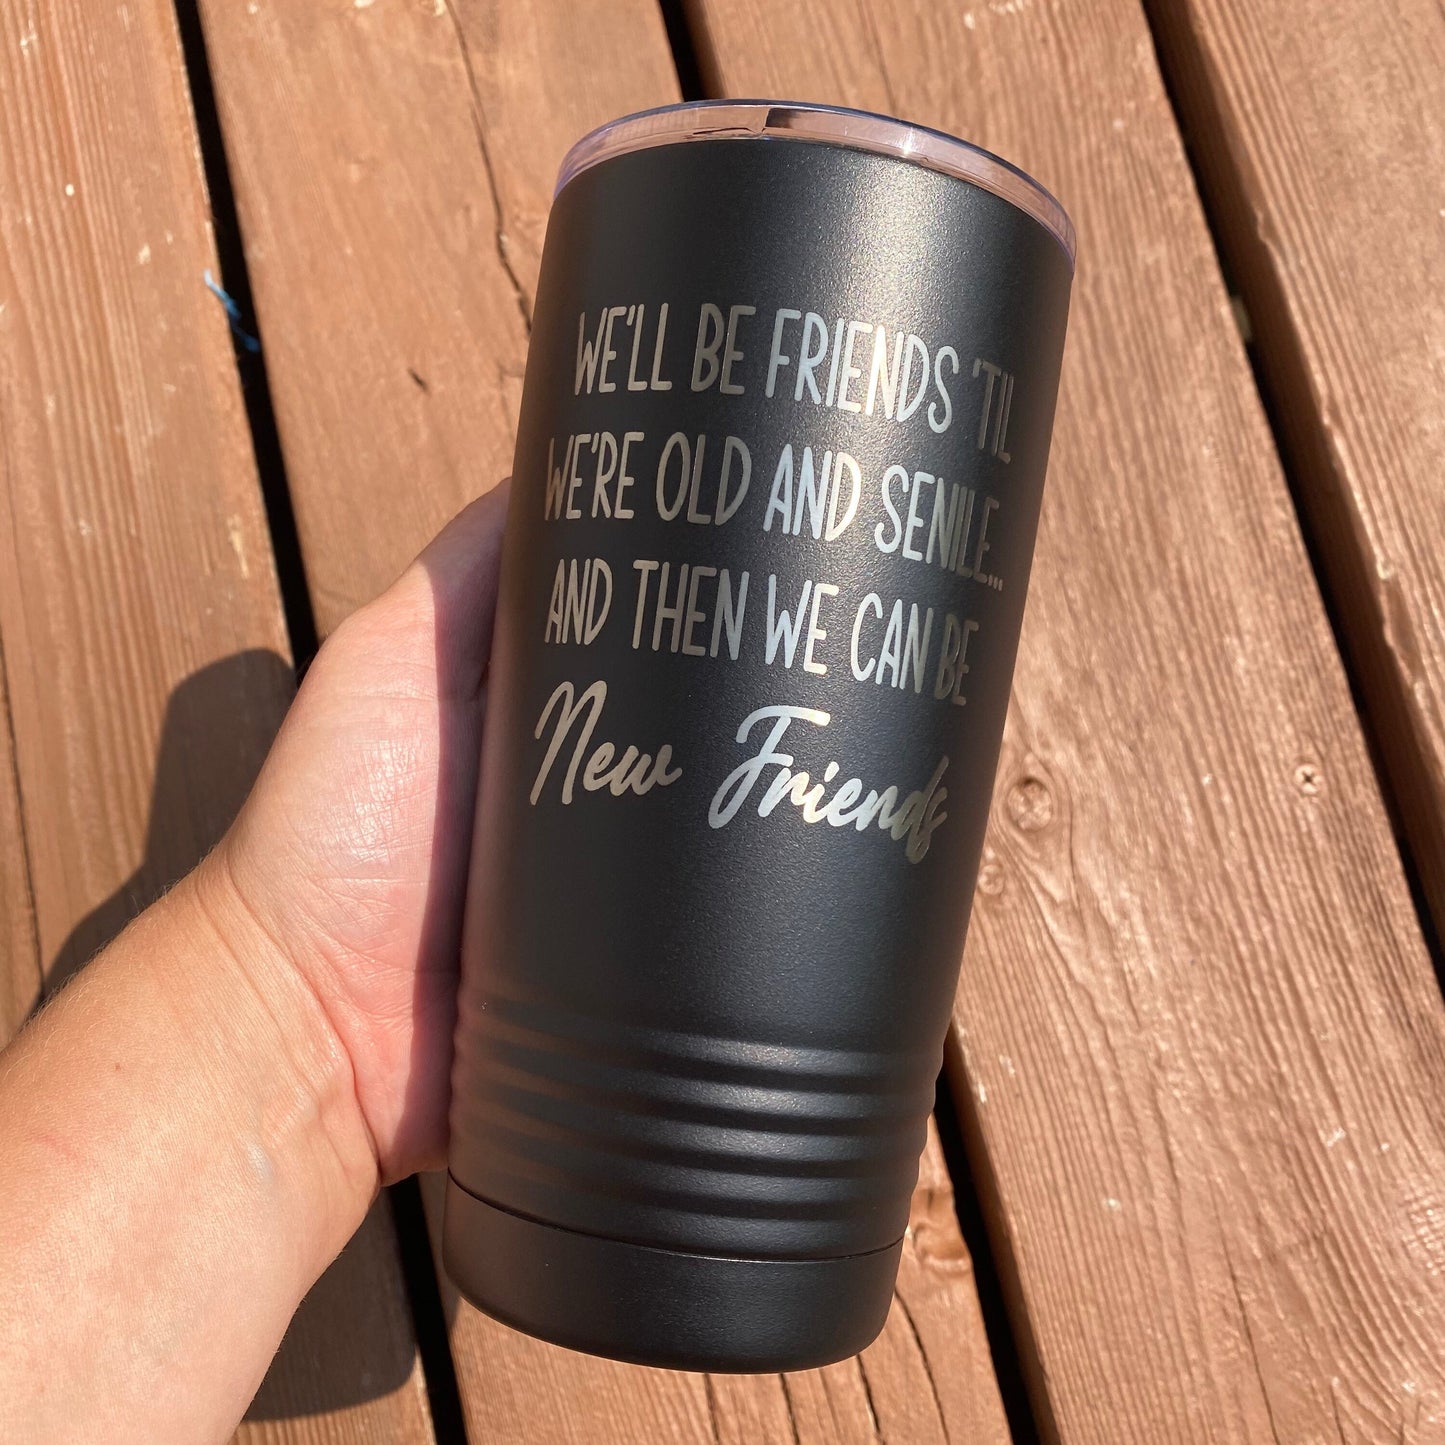 We’ll be friends ‘til we’re old and senile...and then we can be new friends 20oz. Stainless Steel Tumbler